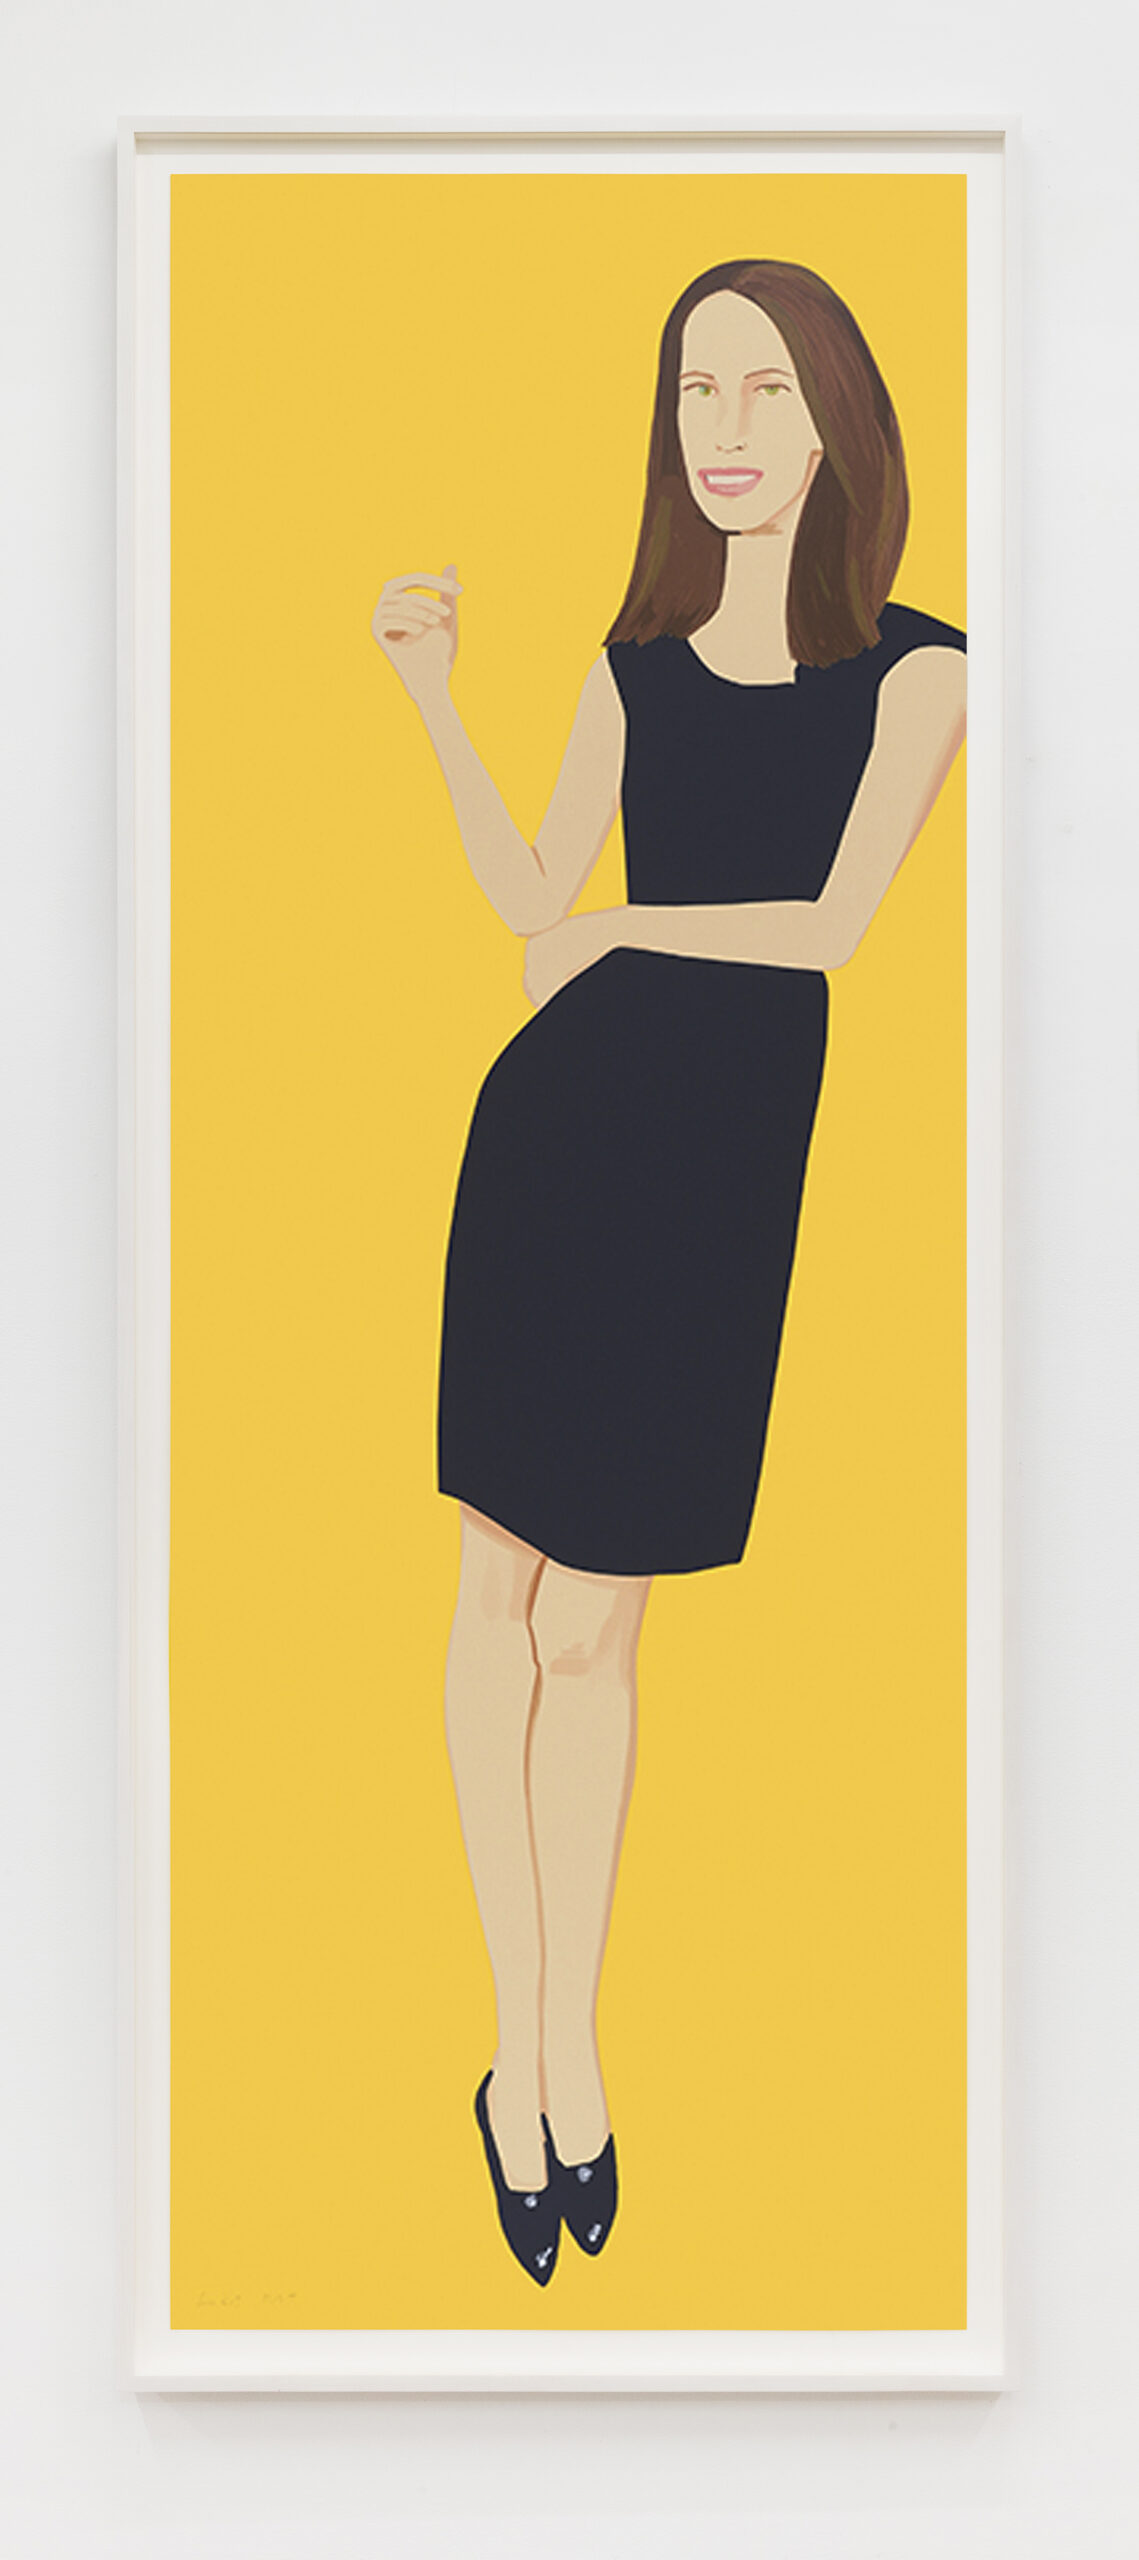 Alex Katz, Black Dress 9 (Christy), 2015 Silkscreen in 29 colors Paper Dimensions: 80 x 30 inches (203.2 x 76.2 cm) Framed Dimensions: 83 3/4 x 33 3/4 inches (212.7 x 85.7 cm) Edition of 35